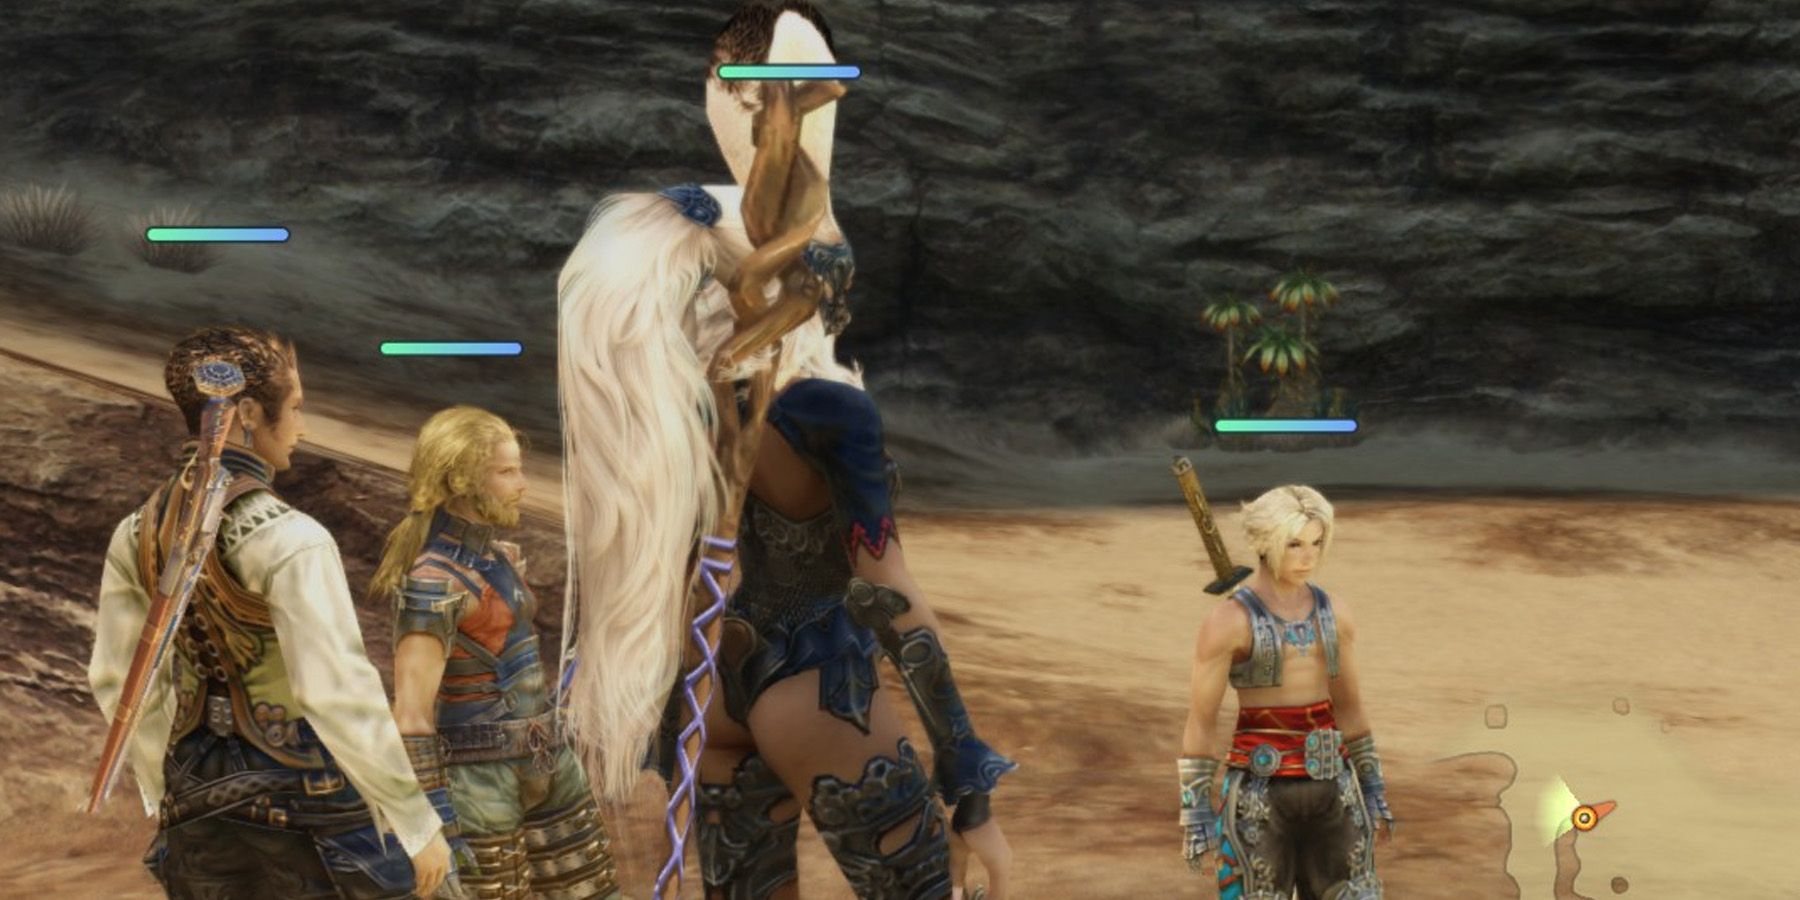 The Party in FF12